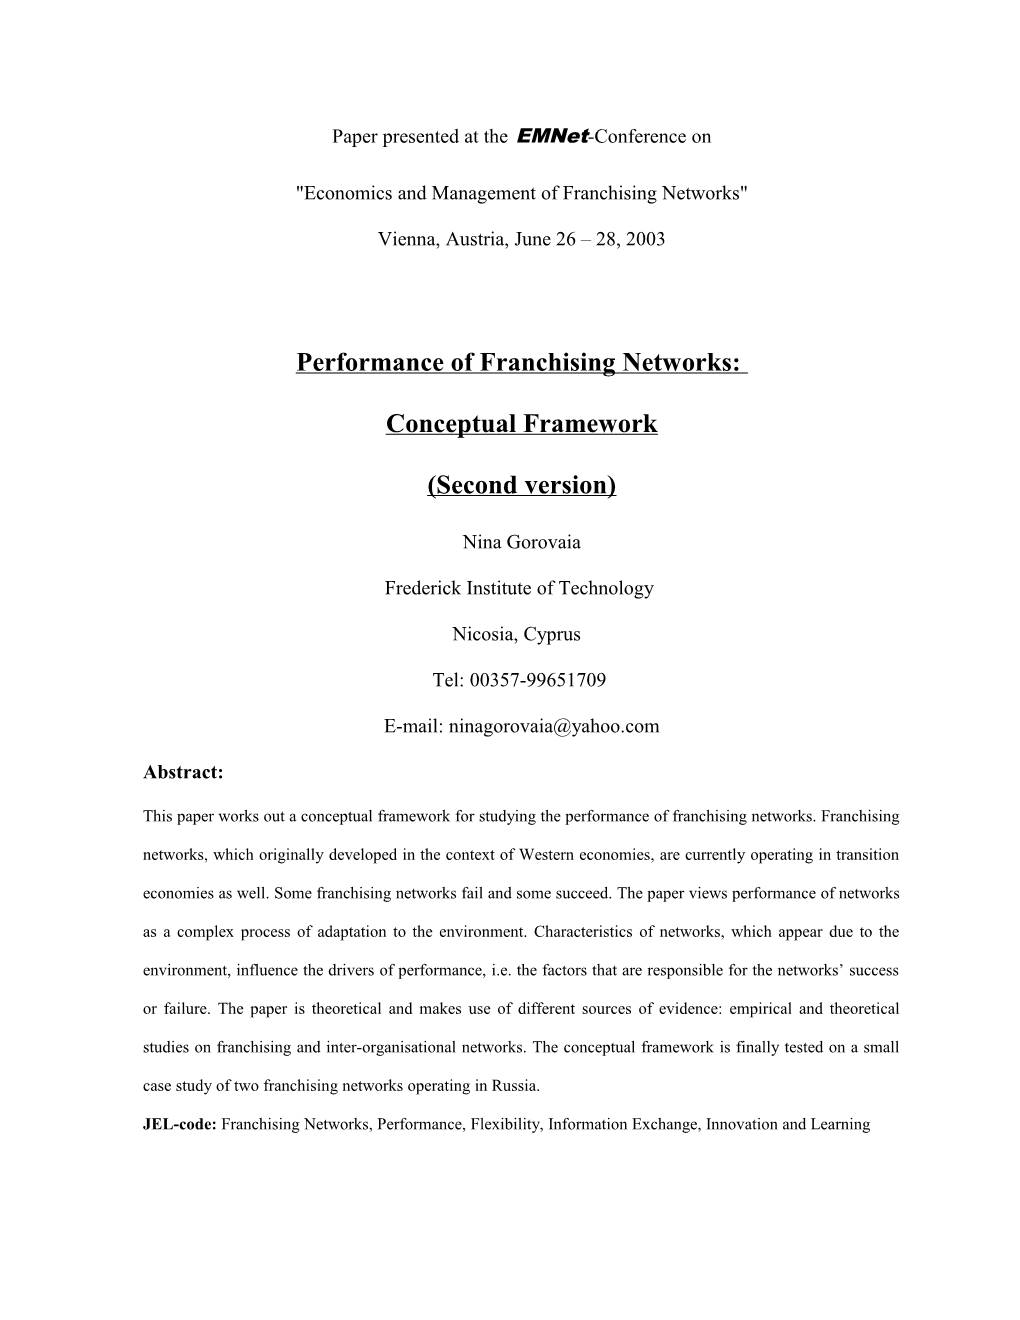 Characteristics and Performance of Franchising Networks: Conceptual Framework